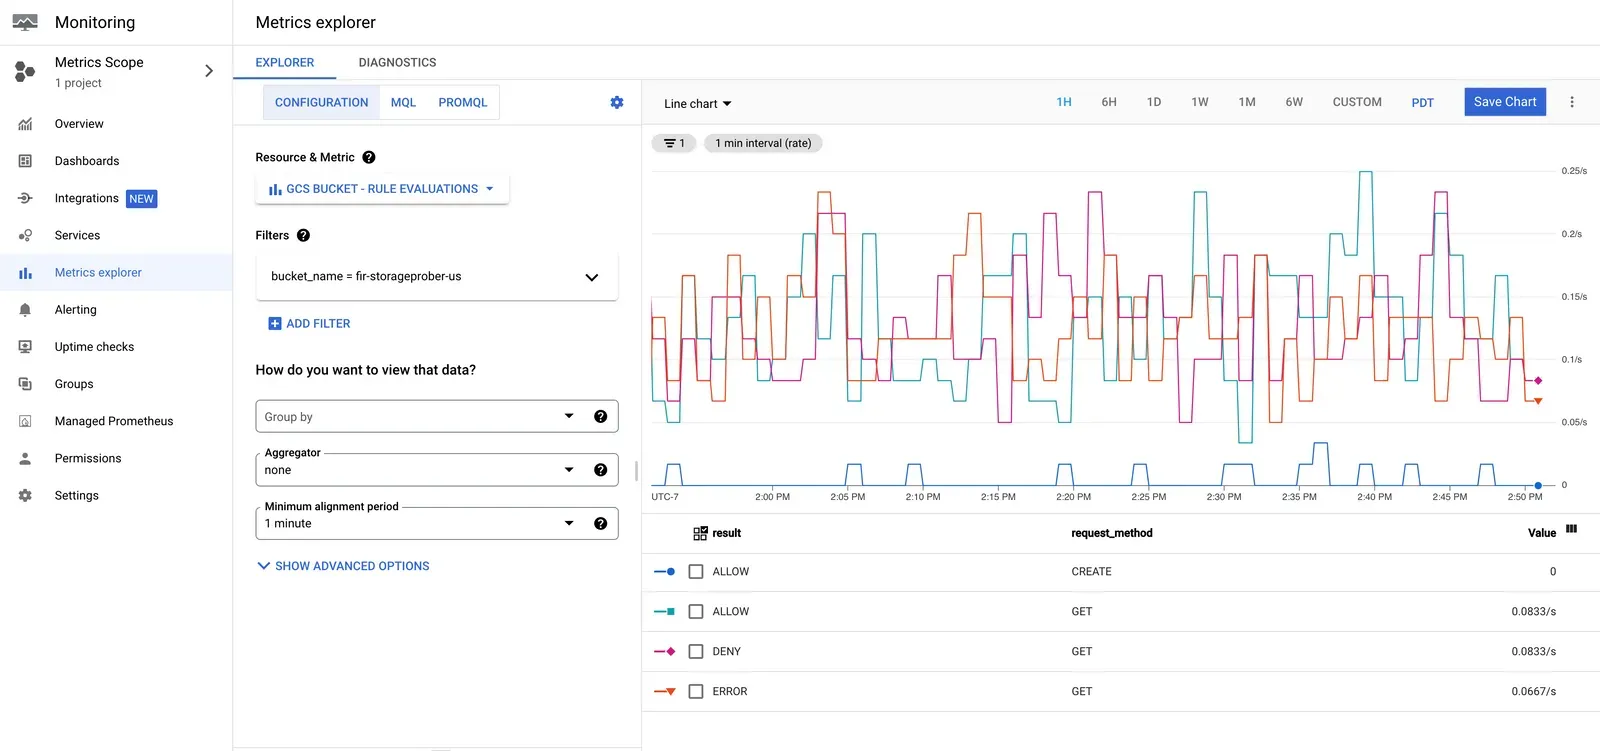 The Google Cloud Metrics Explorer dashboard. Showing allows, denies, and errors over time.